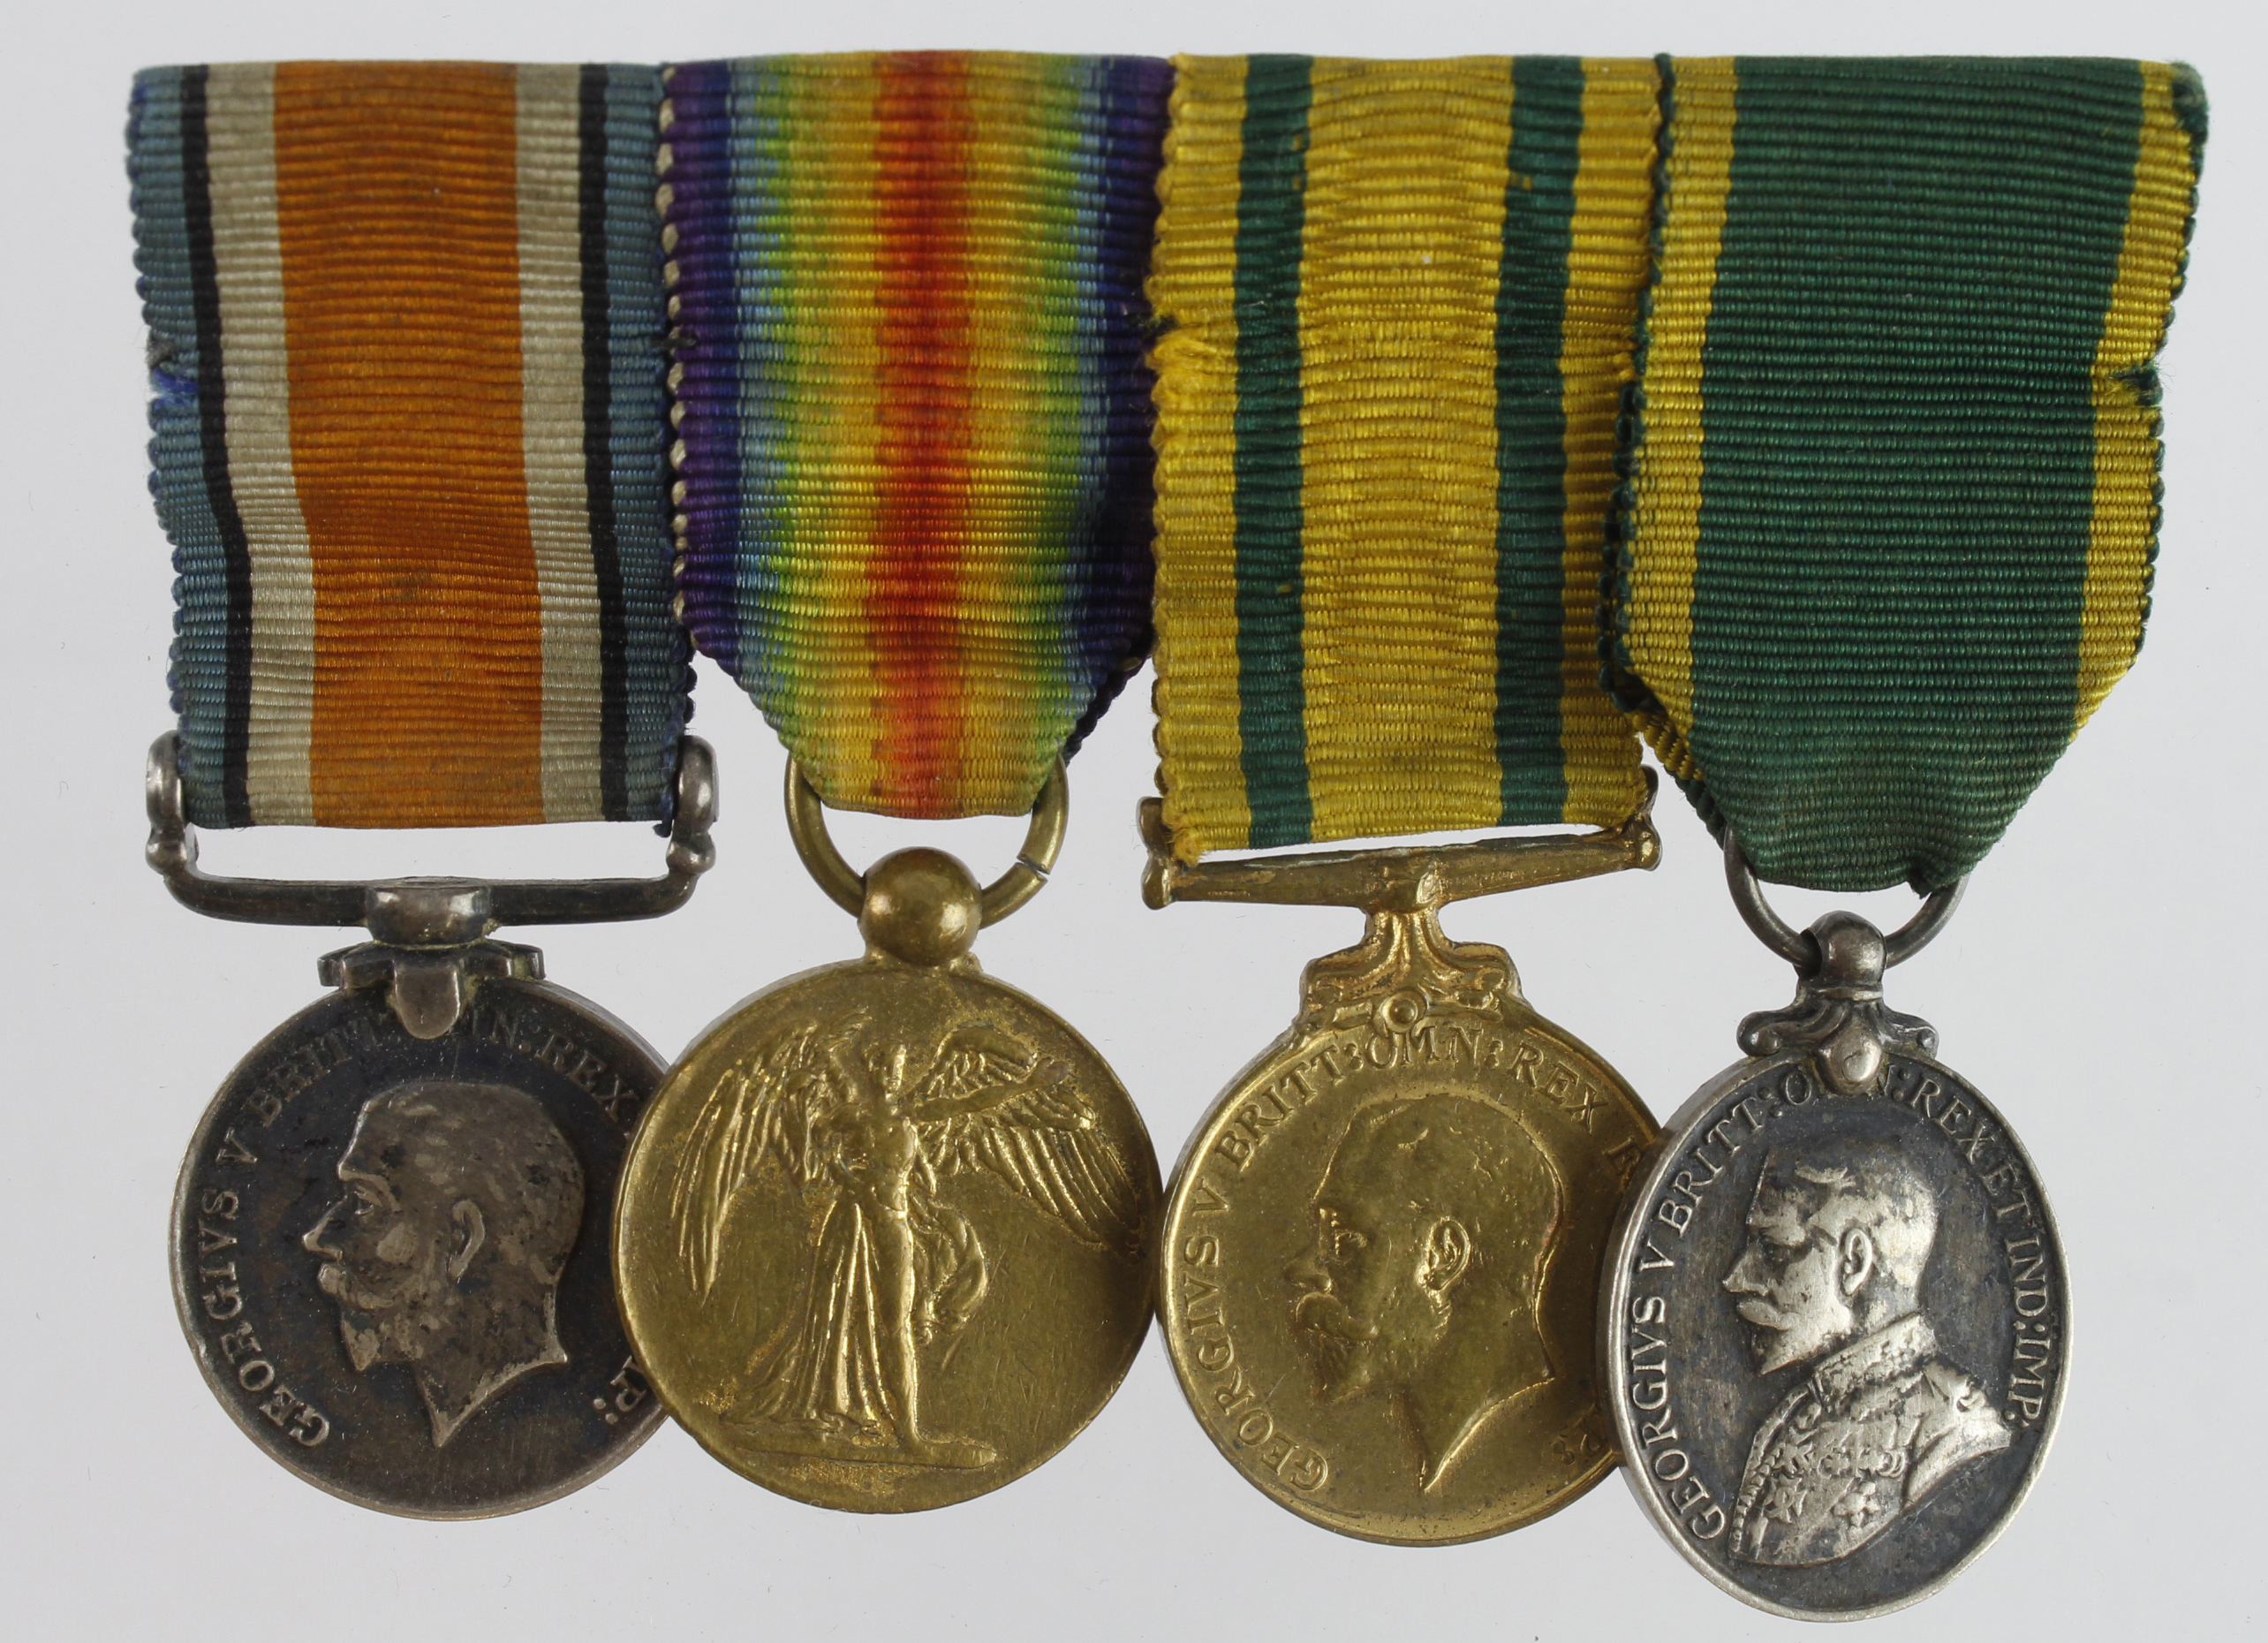 Minature Medal group mounted as worn - BWM & Victory Medal, Territorial War Medal, GV Territorial